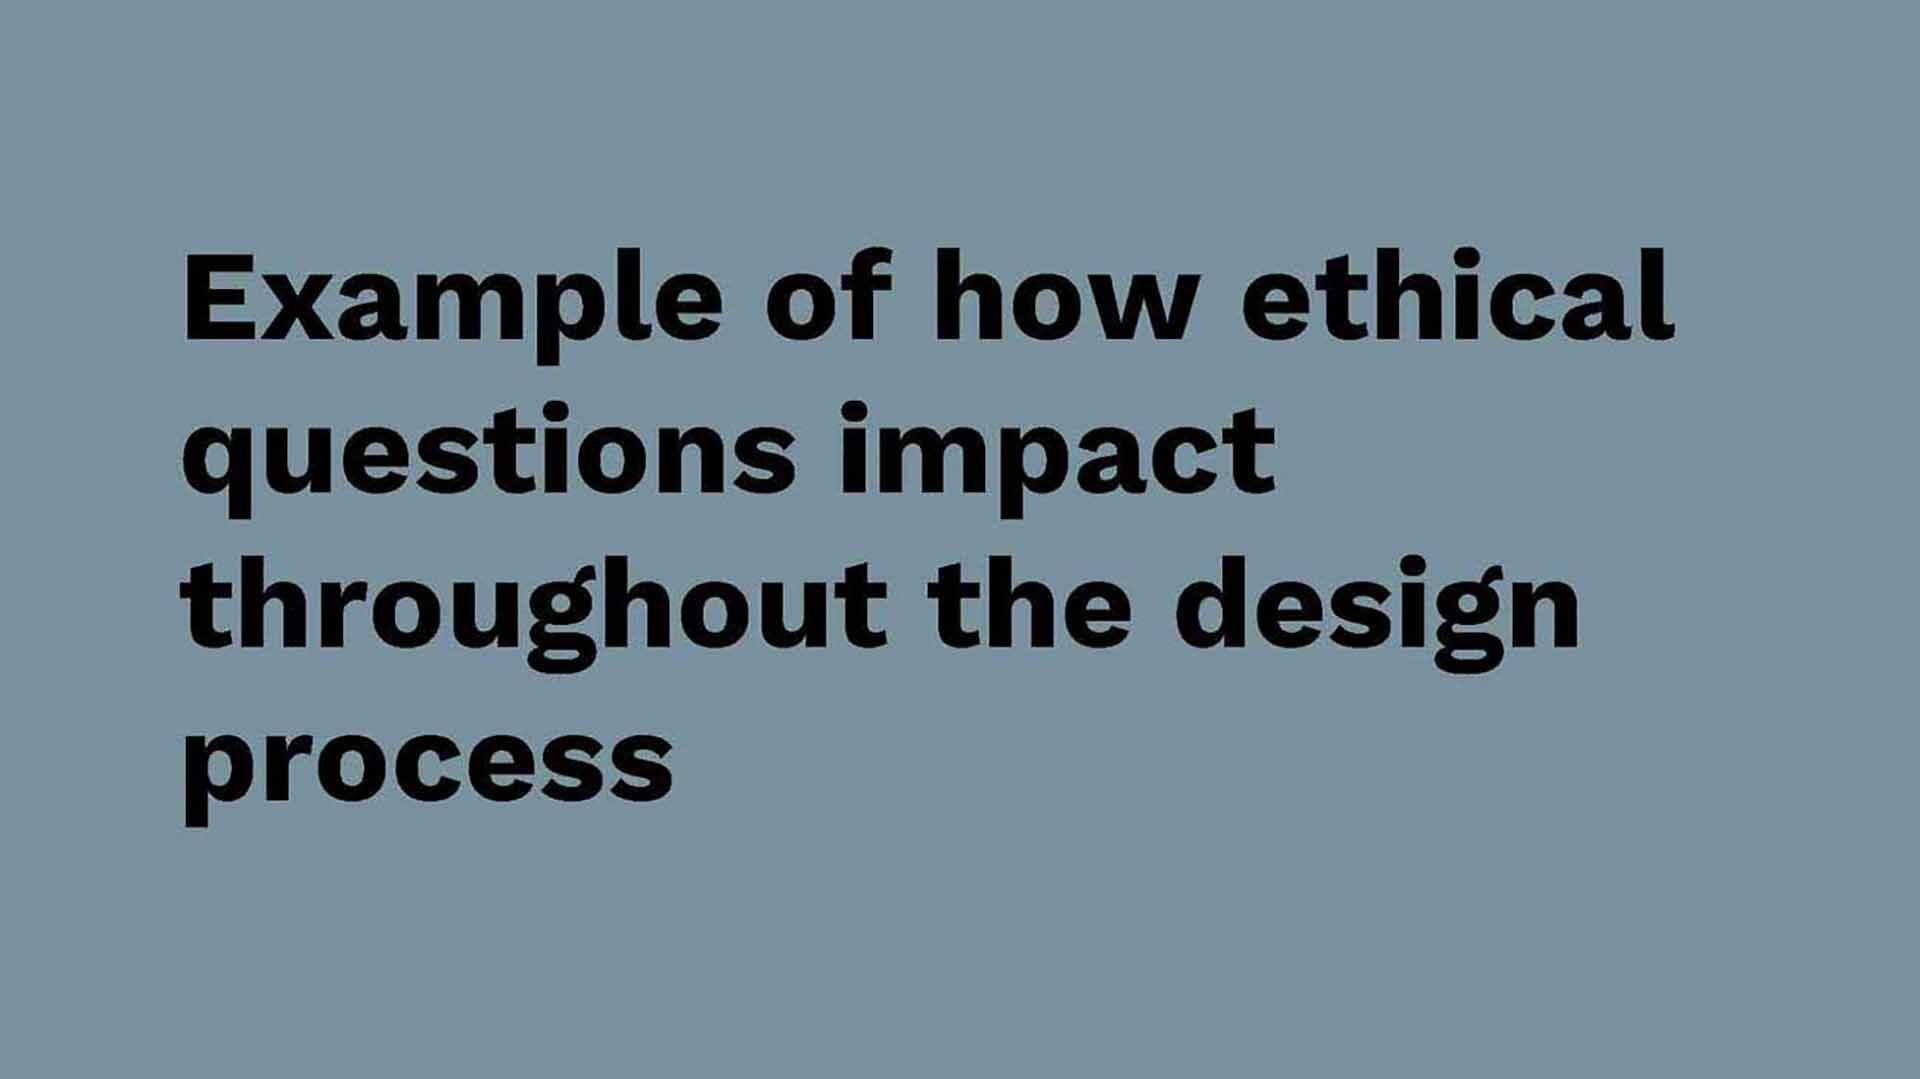 Ethical+questions+for+design_Page_1.jpg